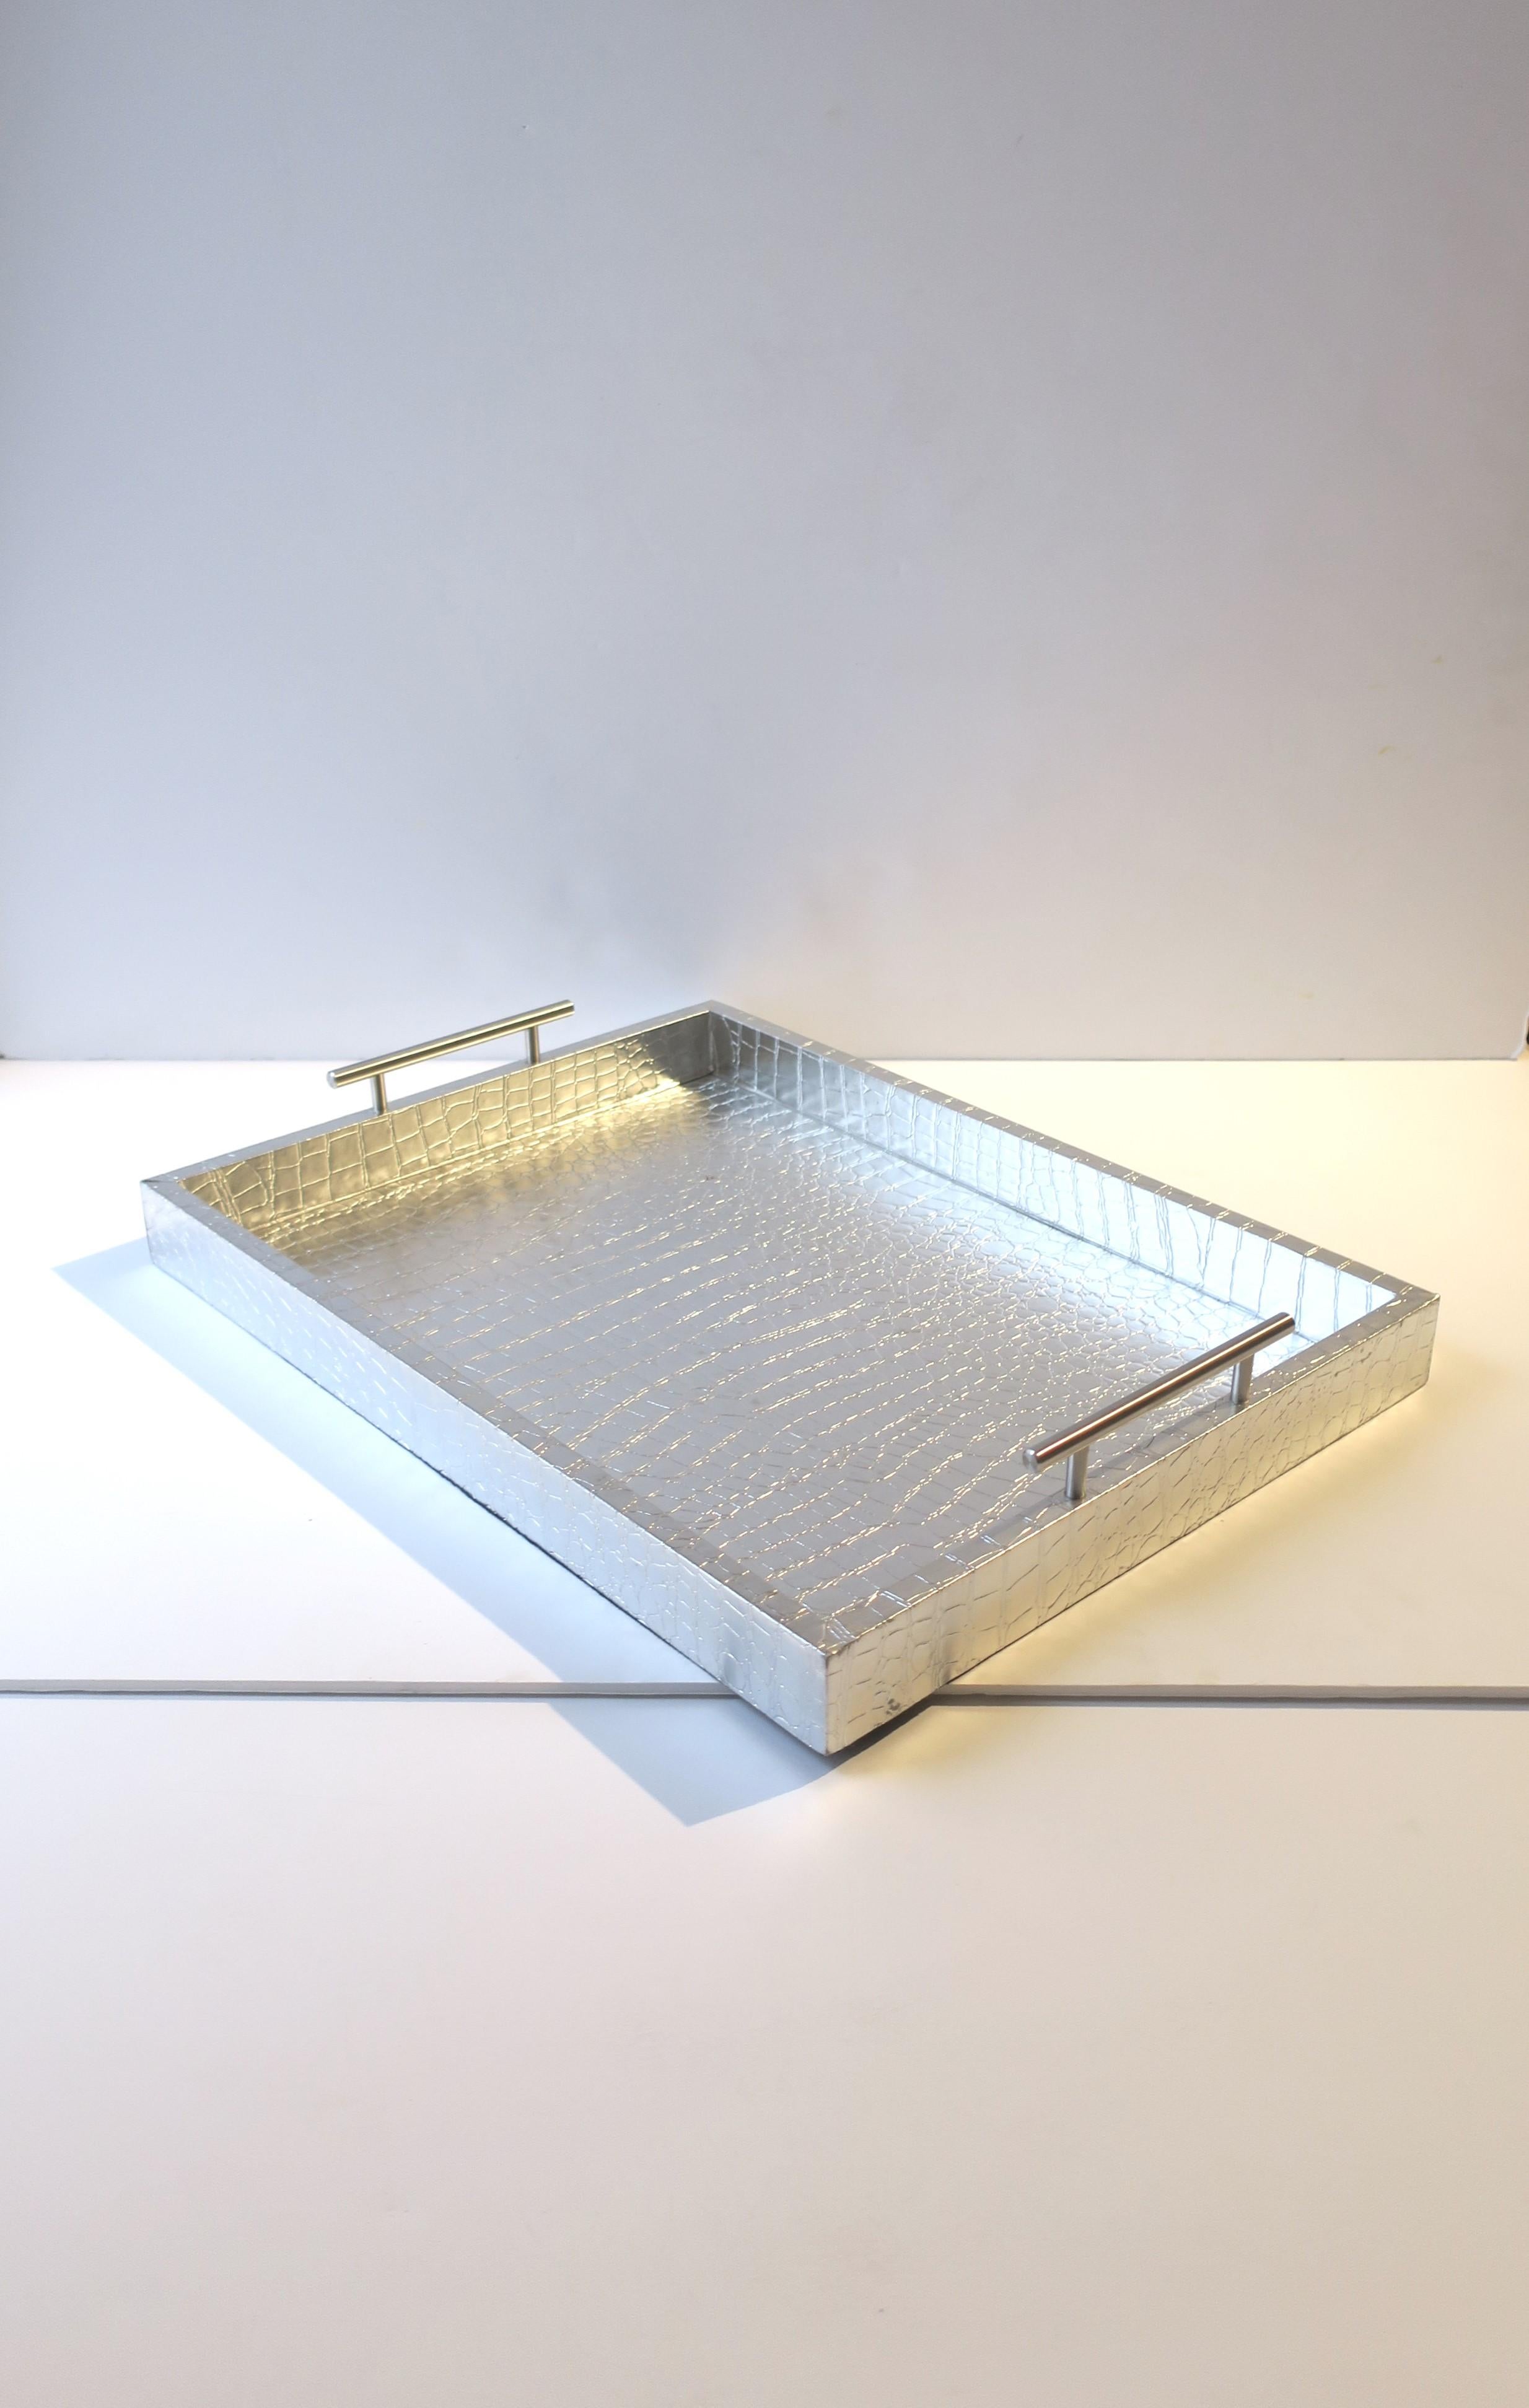 A silver faux crocodile or alligator serving or storage tray with metal handles. This rectangular tray is wrapped in a silver faux crocodile or alligator material and finished with brushed chrome metal handles. Tray is great for serving or to